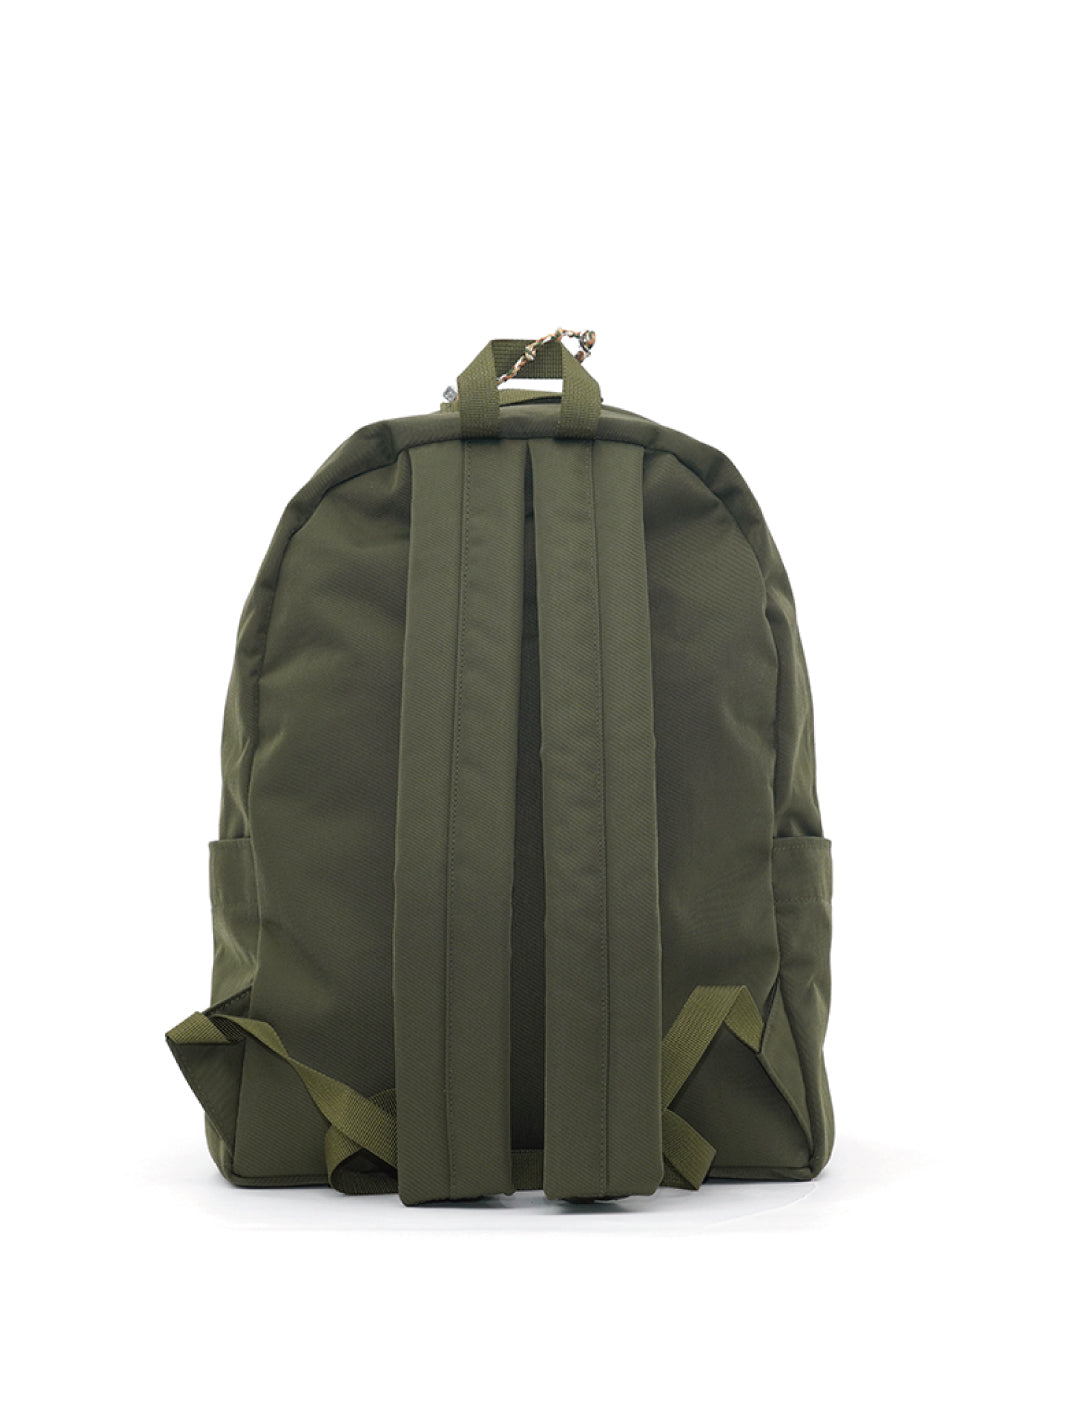 MATCH LOGO BACKPACK (MIDDLE)